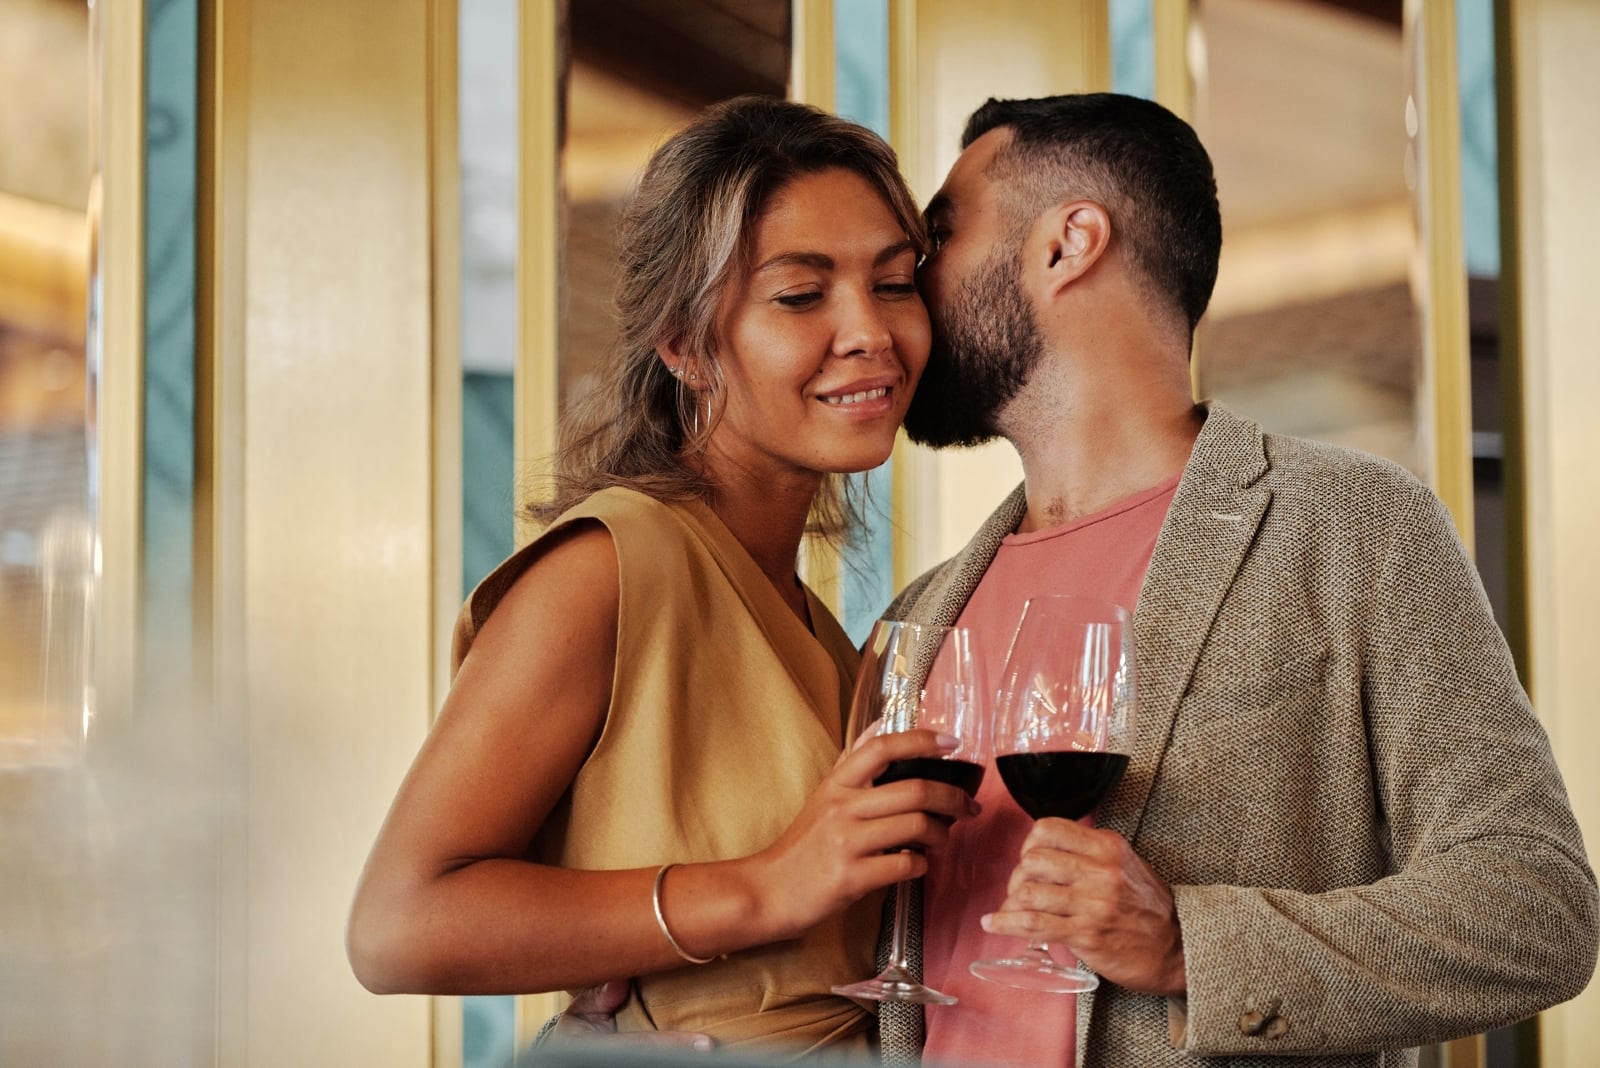 man kissing woman while holding glass of wine